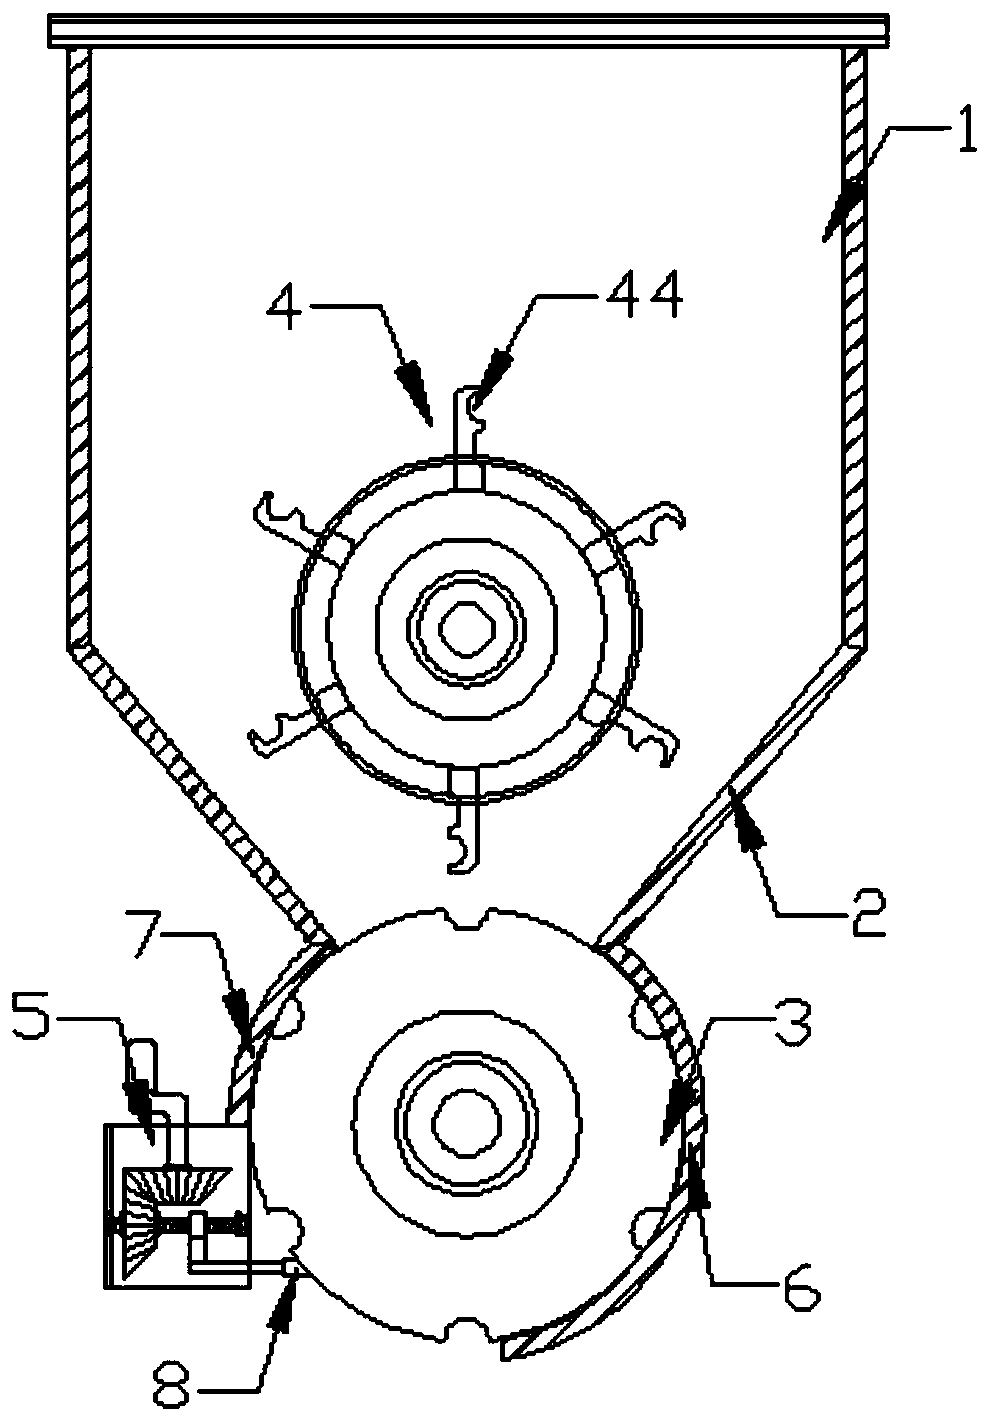 Seed discharging device allowing clay to be conveniently removed and used for seeder